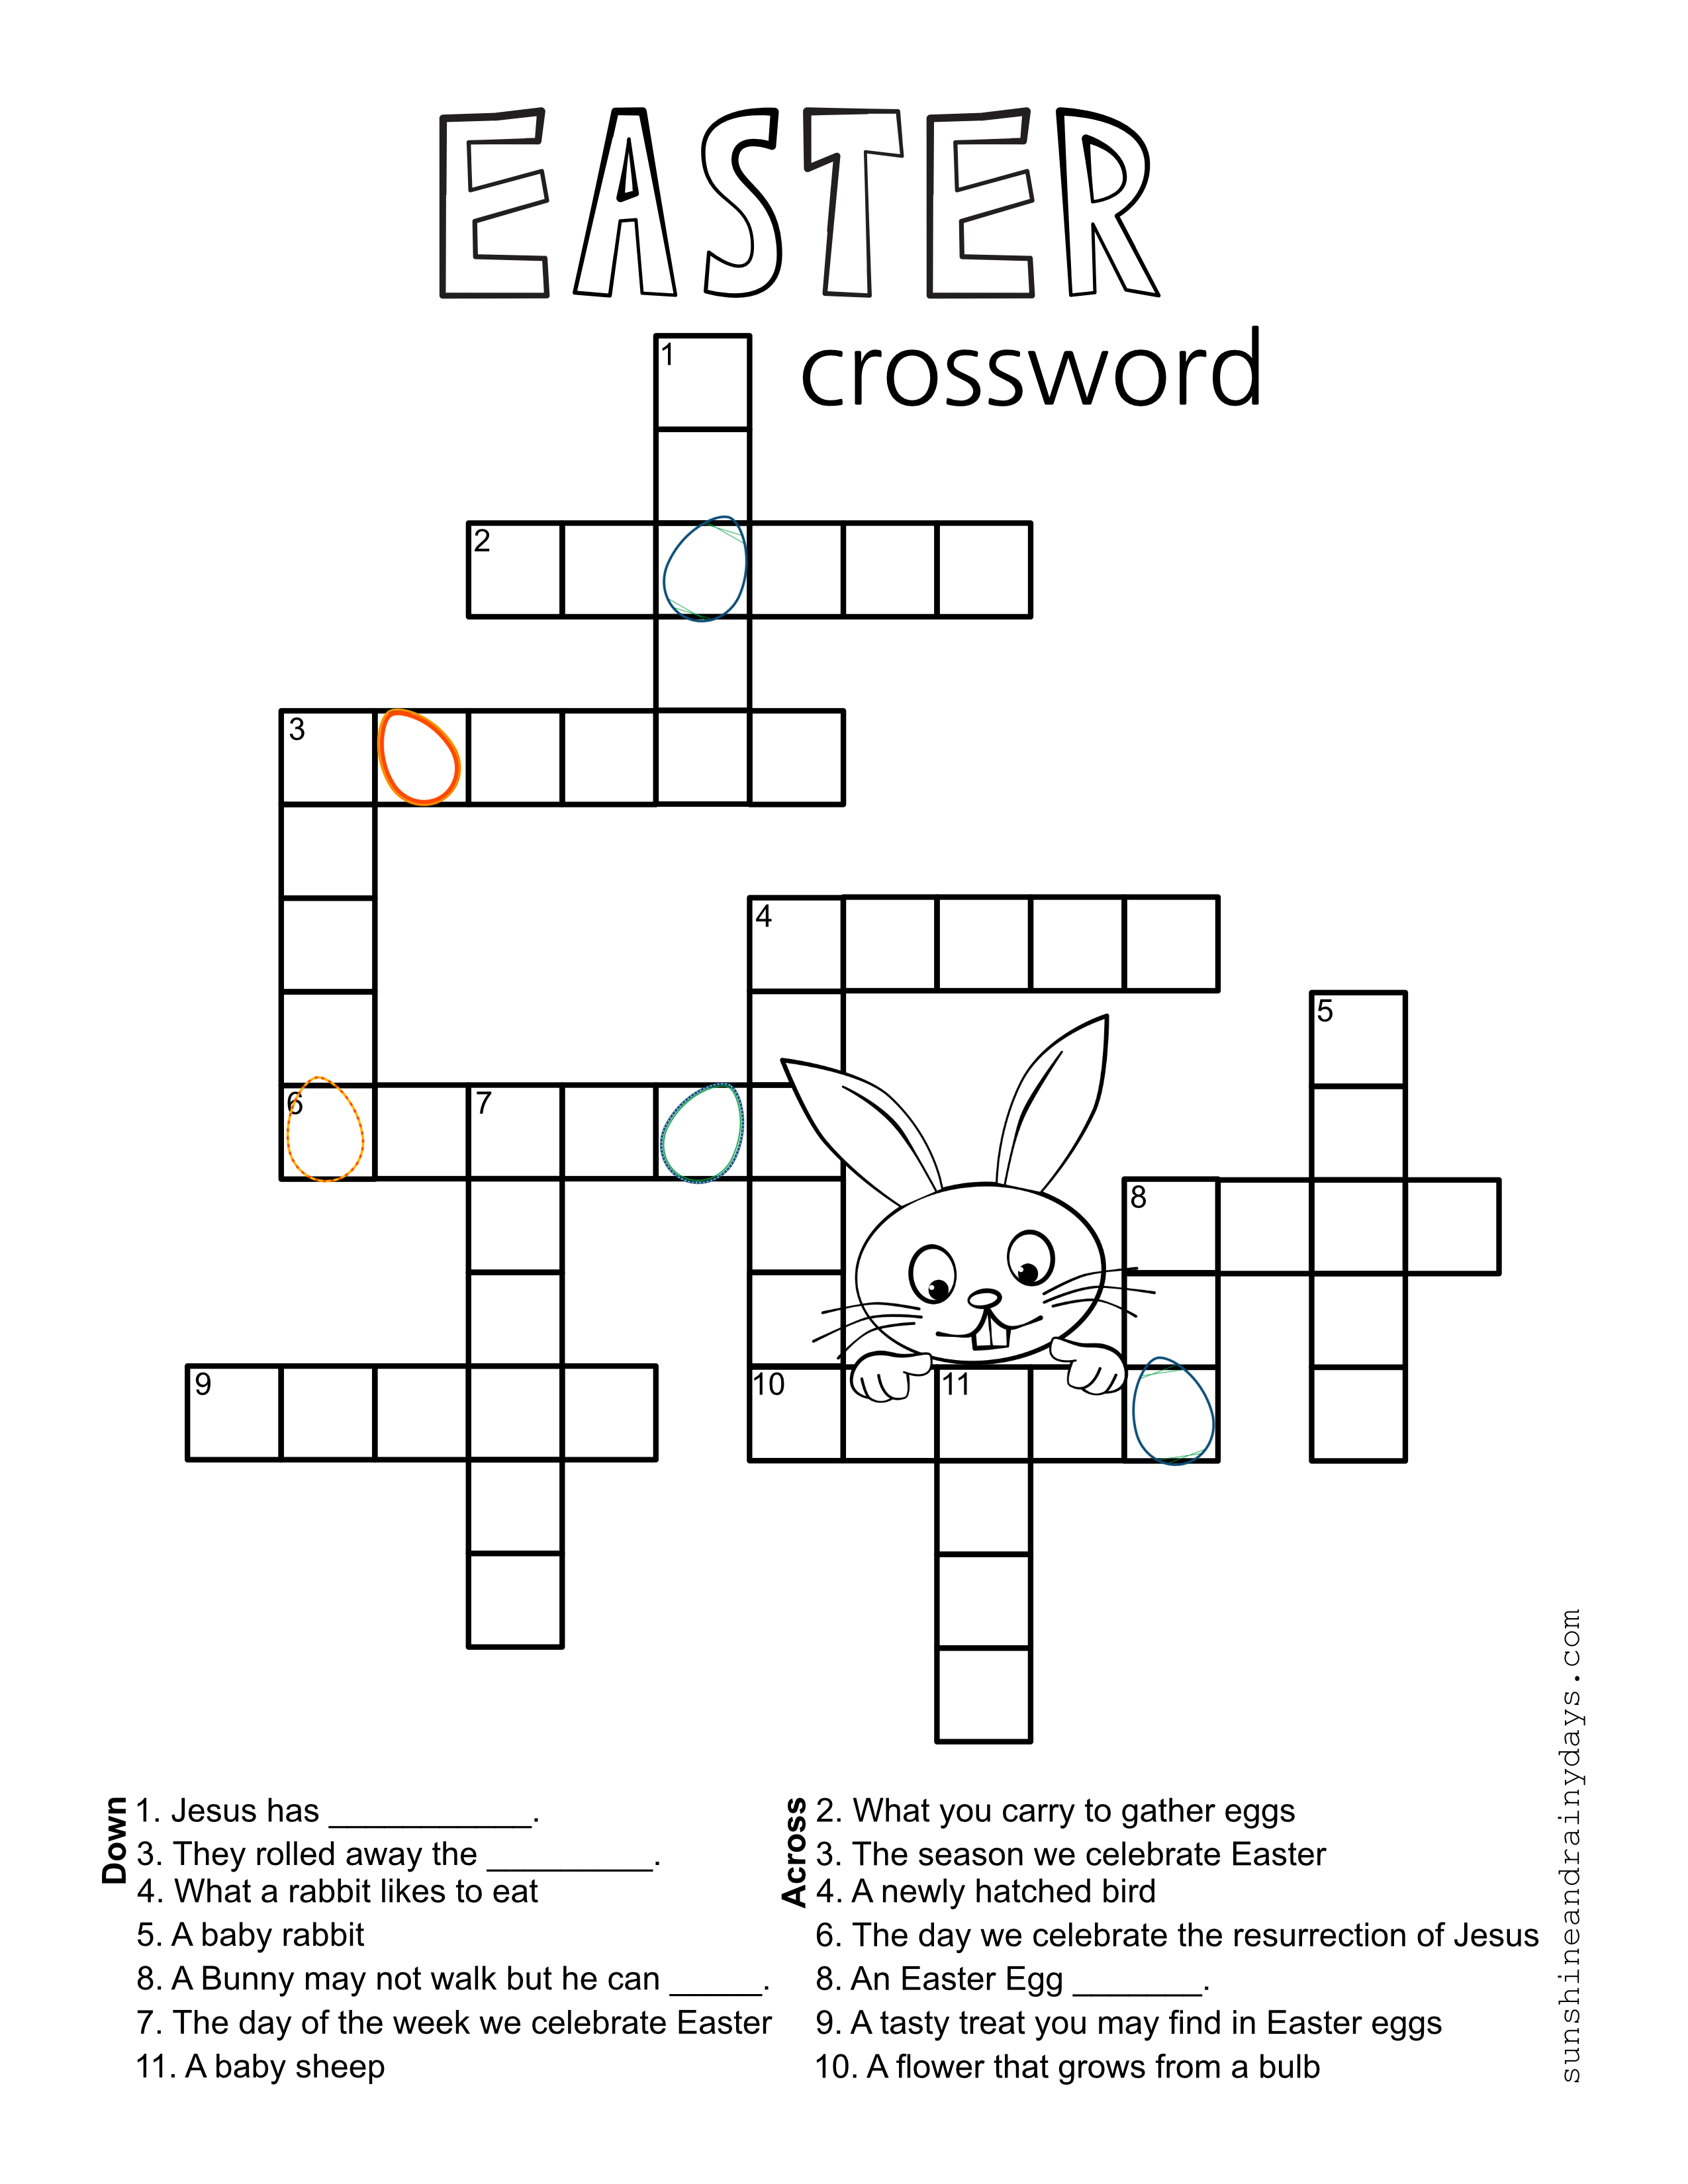 Easter Crossword Puzzle - Sunshine And Rainy Days - Printable Crossword Easter